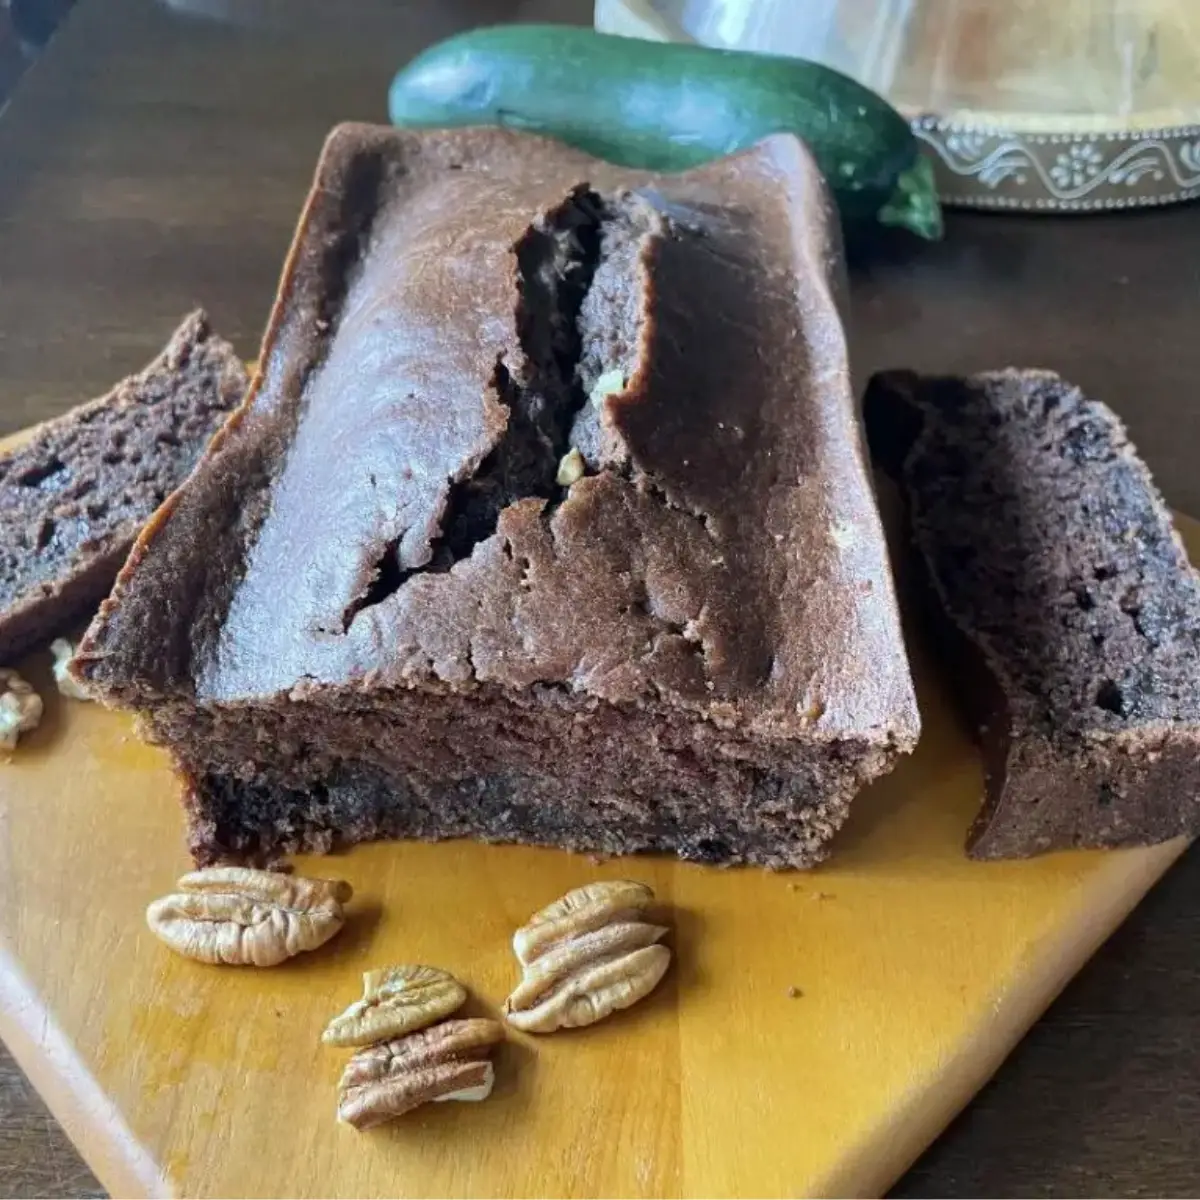 Moist and Delicious Double Chocolate Zucchini Bread garnished with walnuts